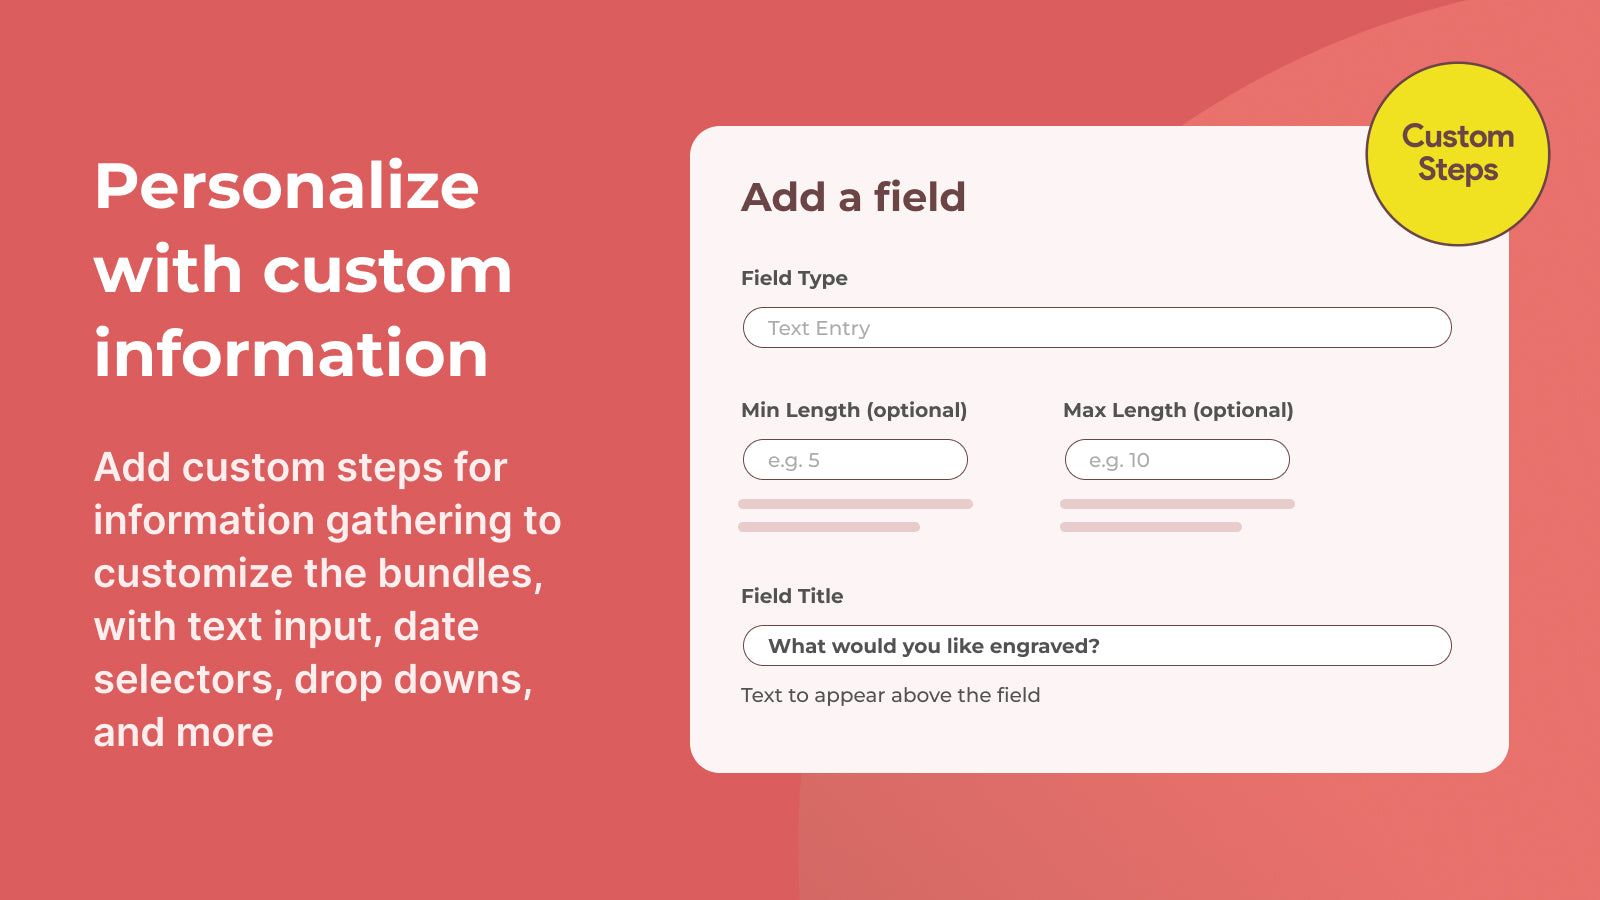 Add personalization to your bundles